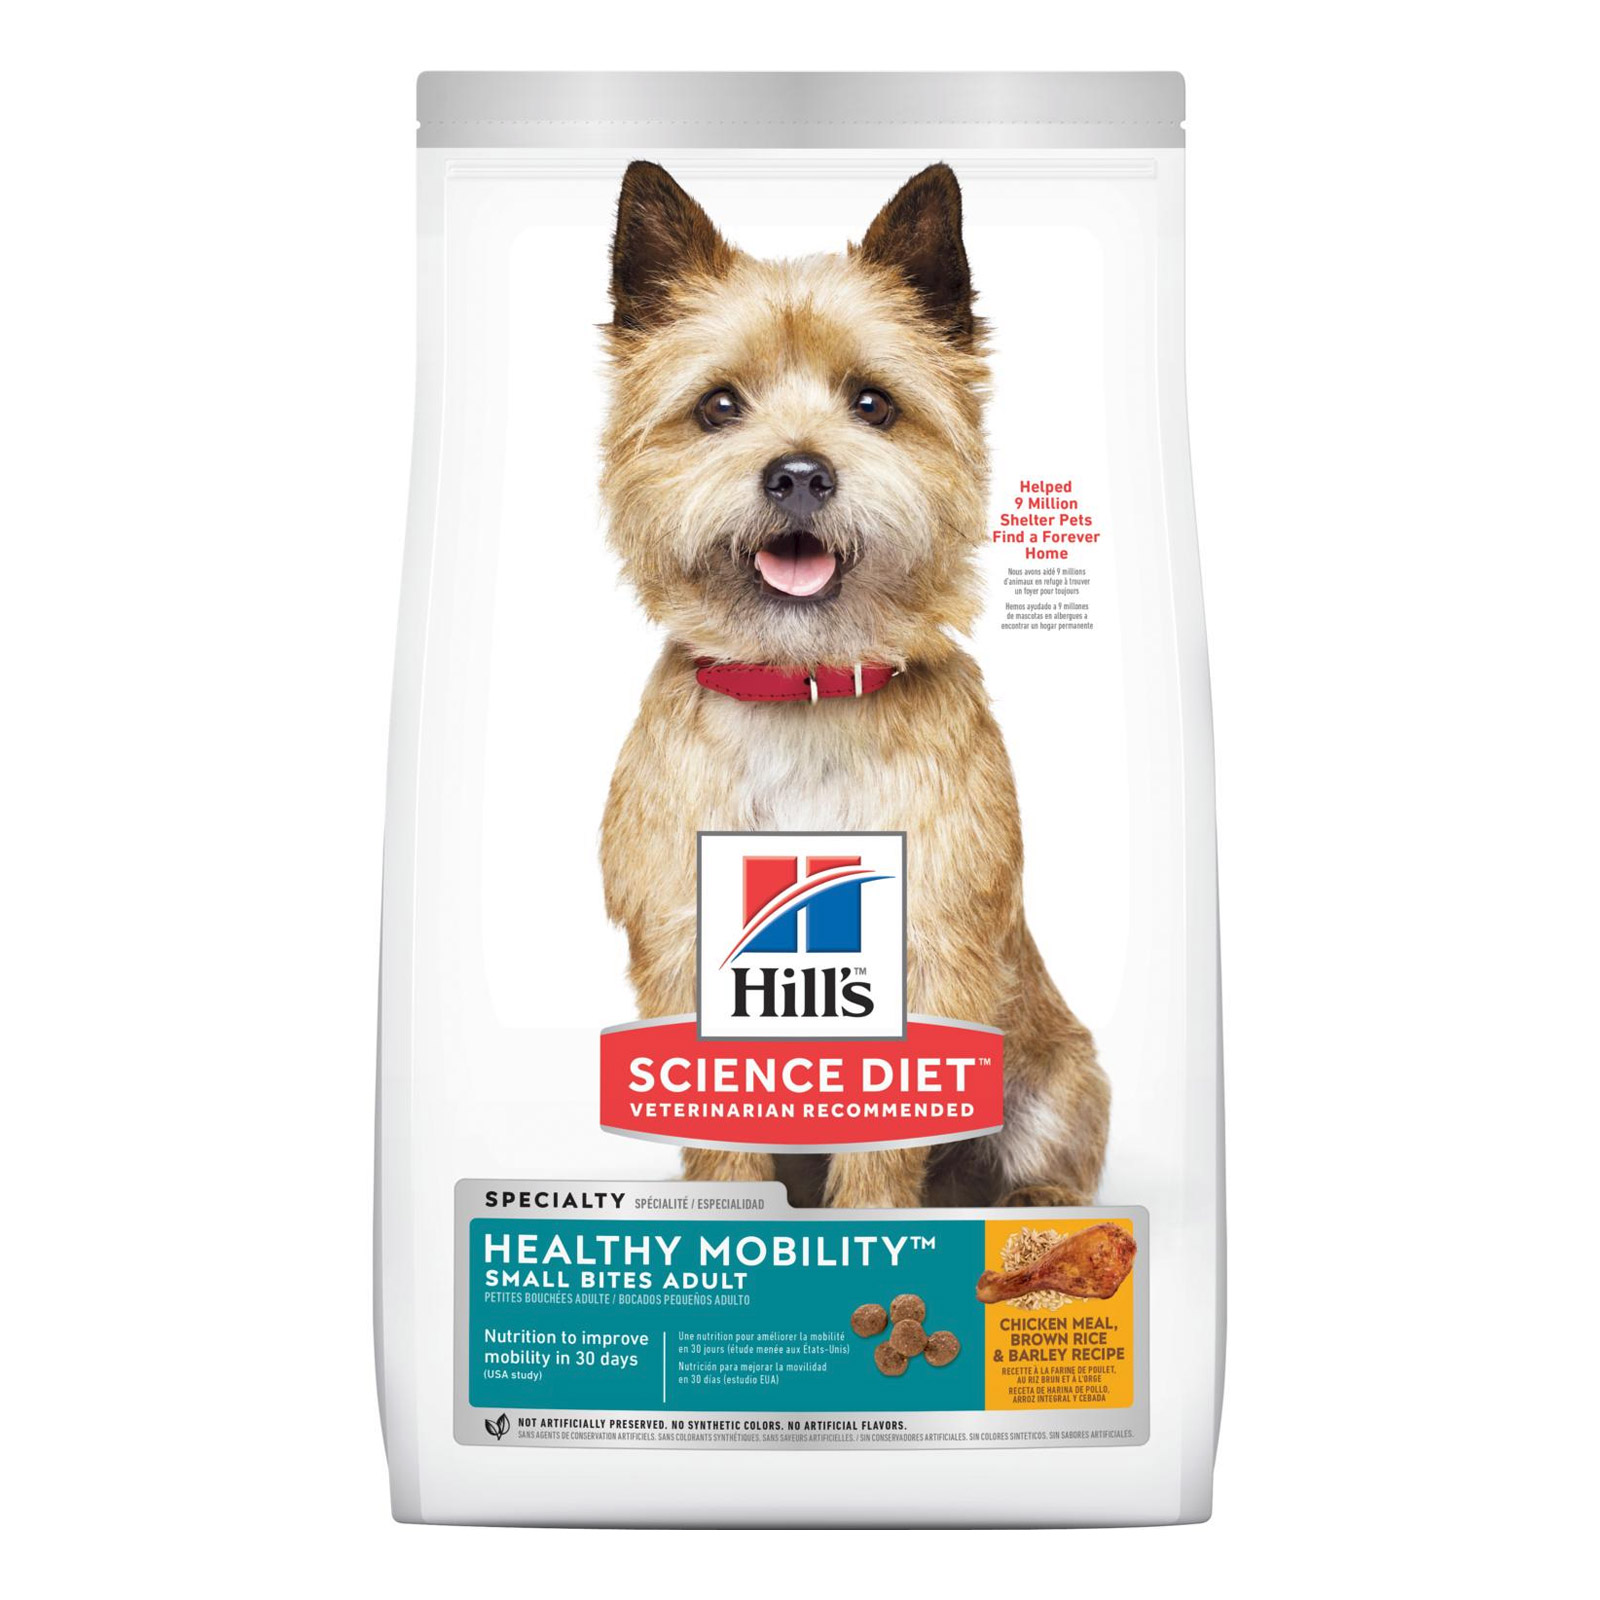 Hill's Science Diet Adult Healthy Mobility Small Bites Dog Food for Food